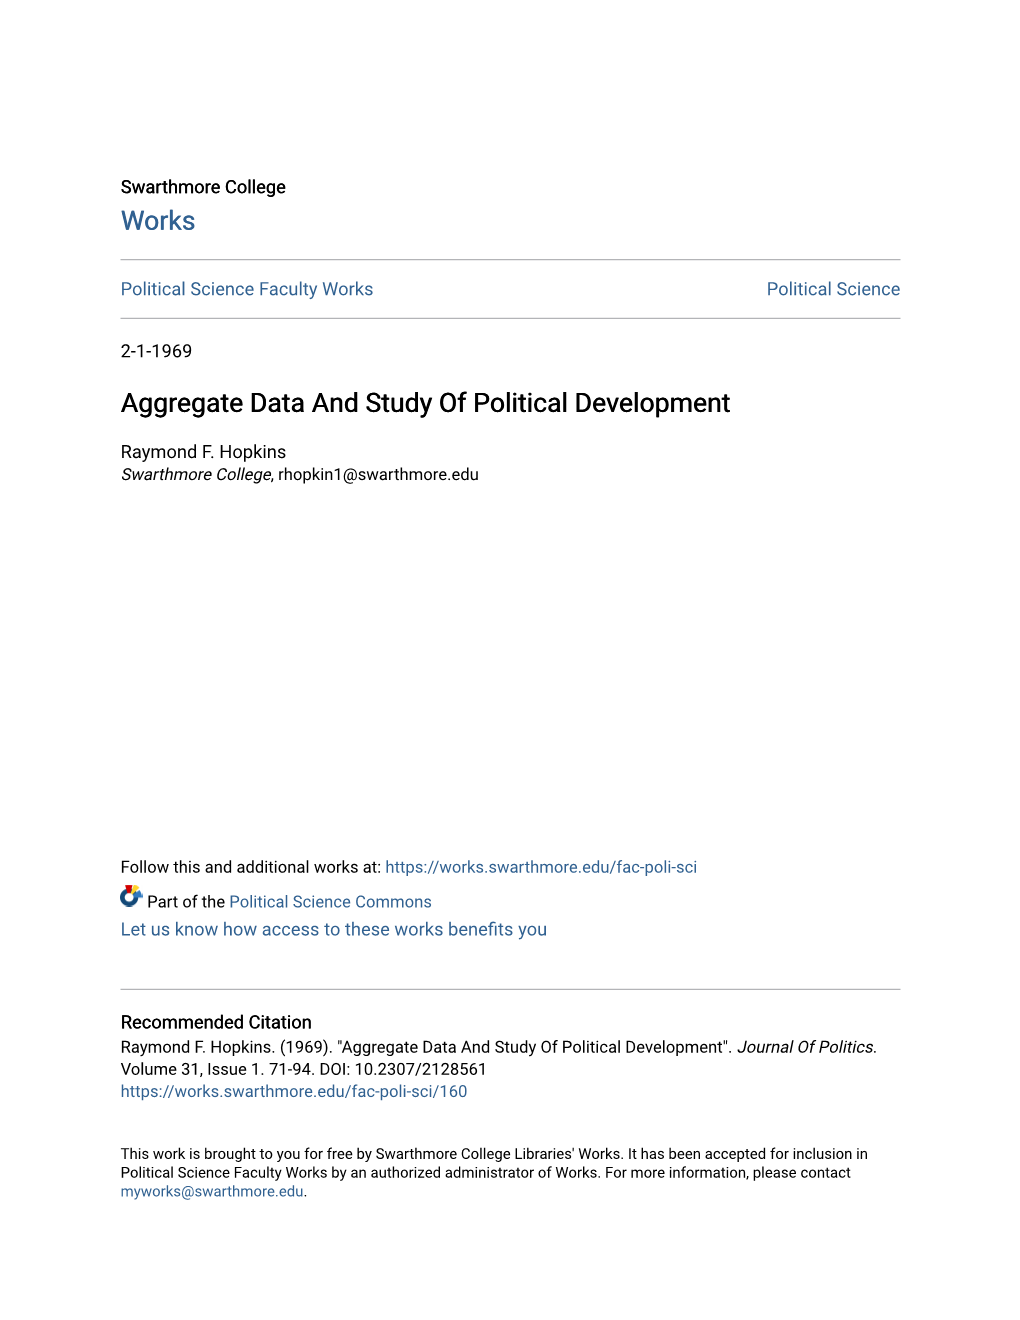 Aggregate Data and Study of Political Development